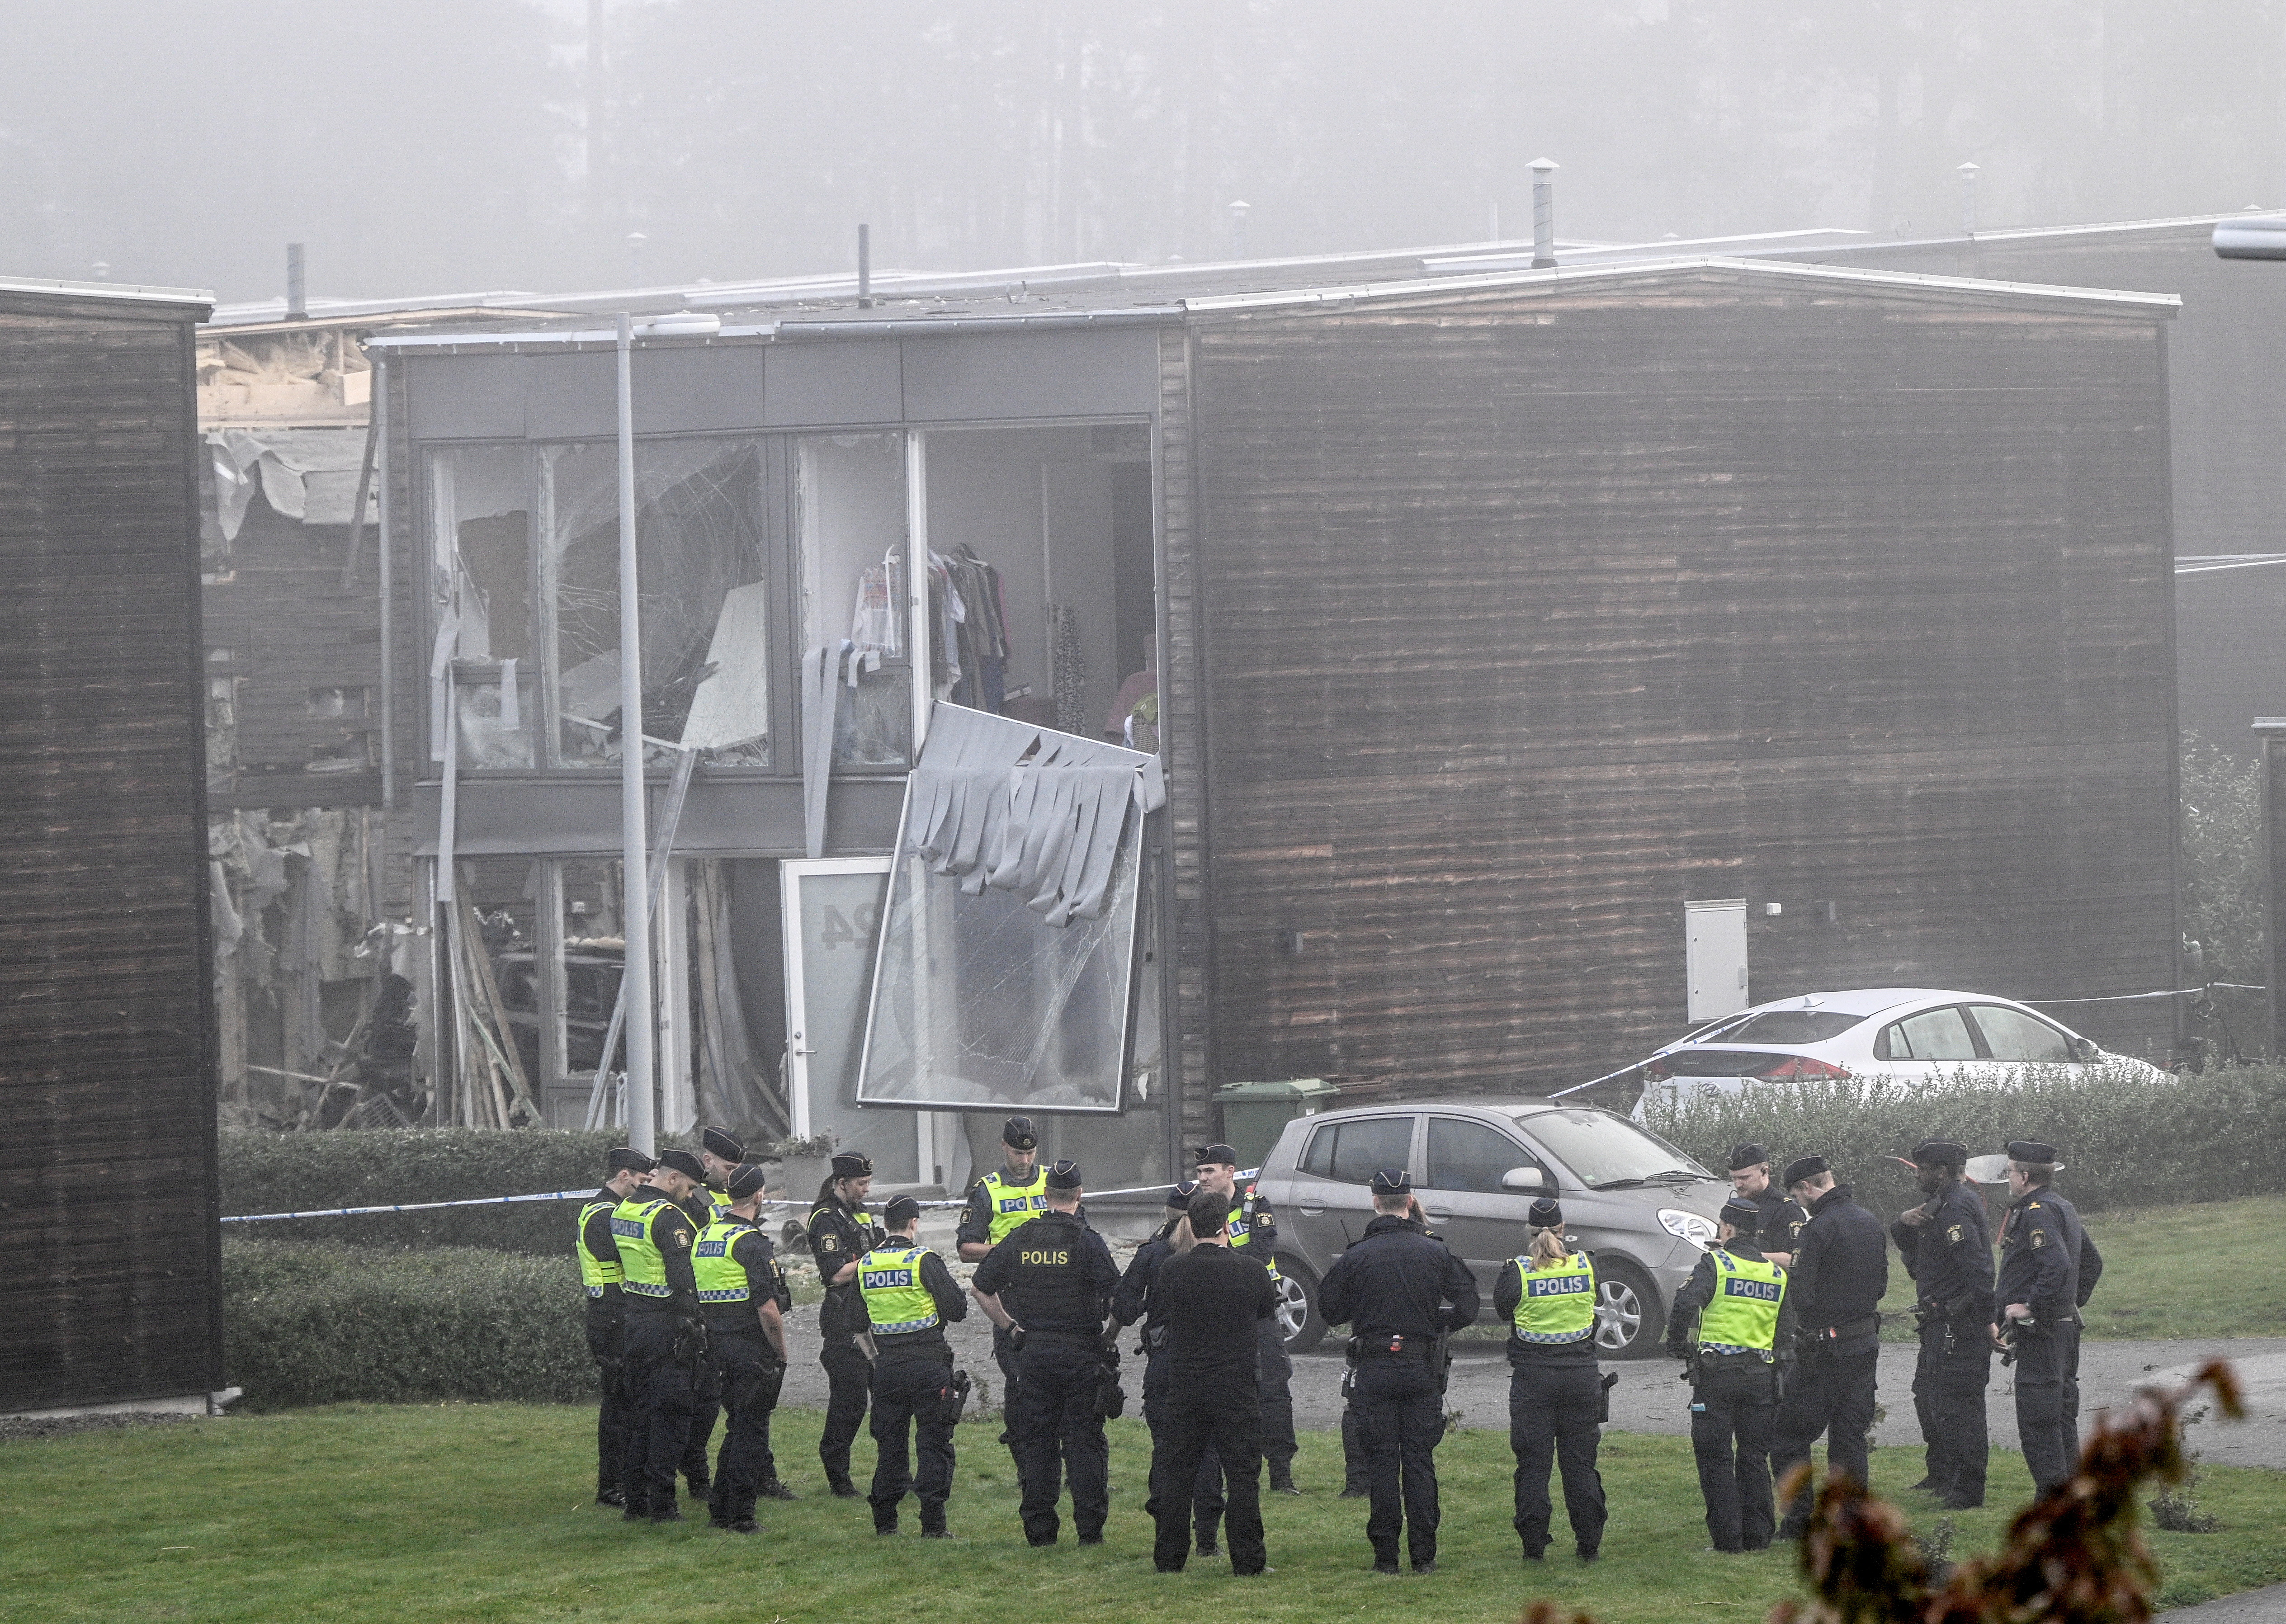 Gang violence has erupted across Sweden, causing the deaths of 12 people in September alone. An explosion in a housing block in Storvreta was attributed to gangs and resulted in the death of a young woman. /TT News Agency/Reuters